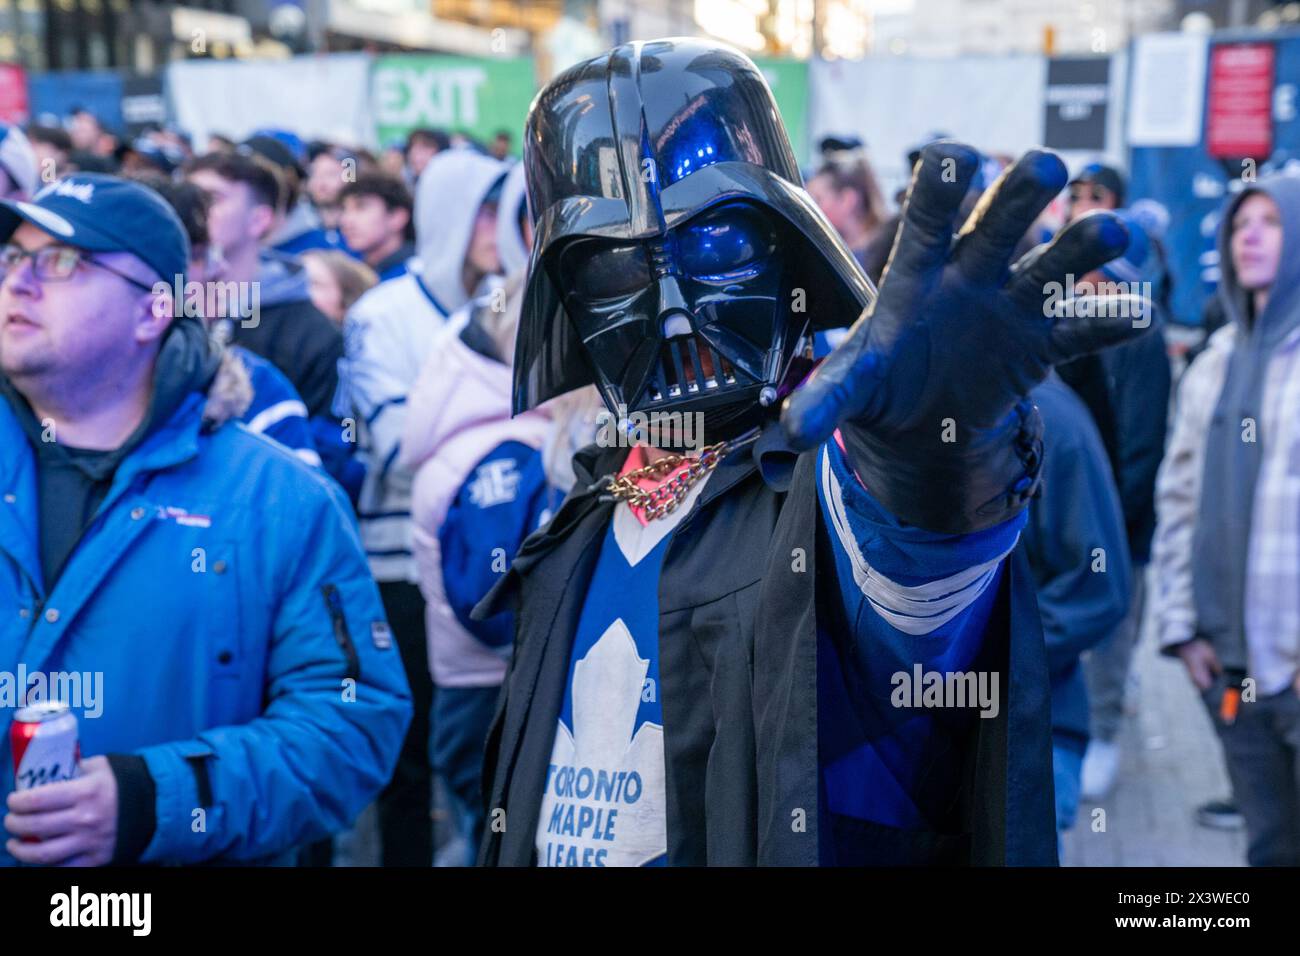 Fan dressed as Darth Vader at Maple Leaf Square outside Scotibank Arena, watching Round 1, Game 4 playoff game of Toronto Maple Leafs vs Boston Bruins playoff game on a giant screen. During Toronto Maple Leafs playoff games, Maple Leaf Square transforms into a sea of blue and white, echoing with the chants of passionate fans eagerly rallying behind their team's quest for victory. The electric atmosphere radiates anticipation and excitement, creating unforgettable memories for both die-hard supporters and casual observers alike. Stock Photo